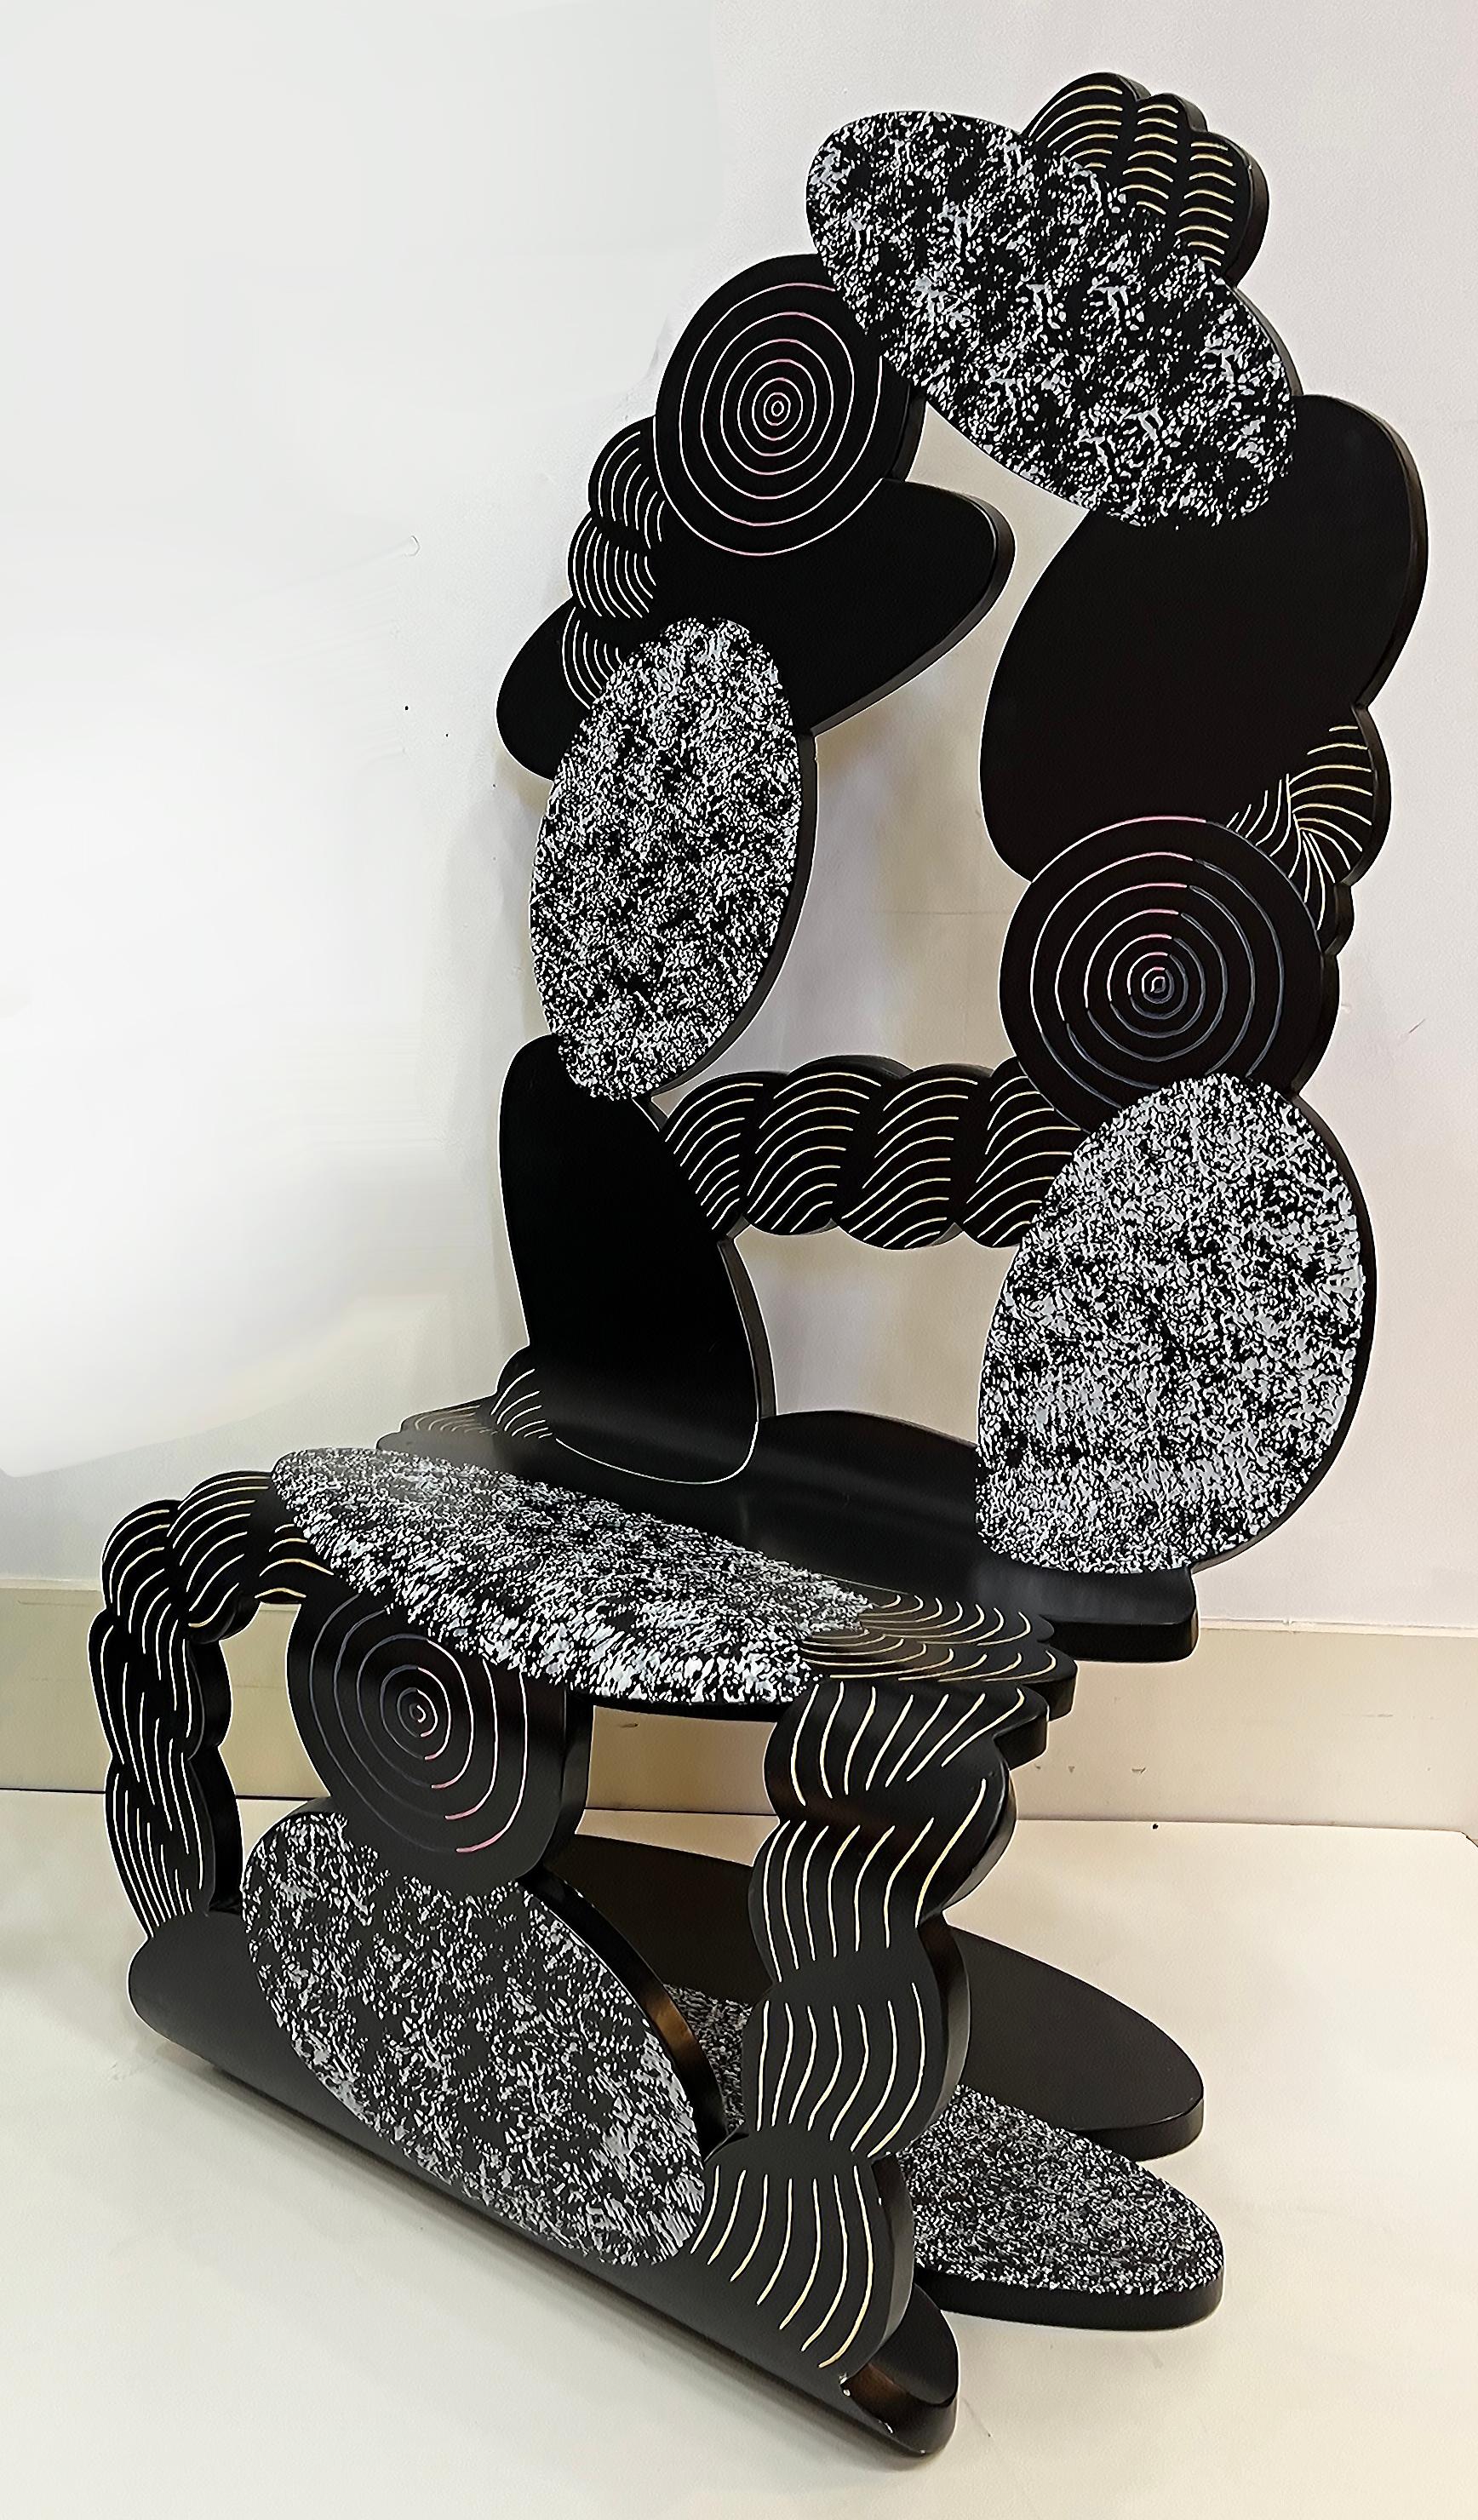 American Overscale Postmodern Sculptural Art Chair by Alan Siegel dated '83-'85 For Sale